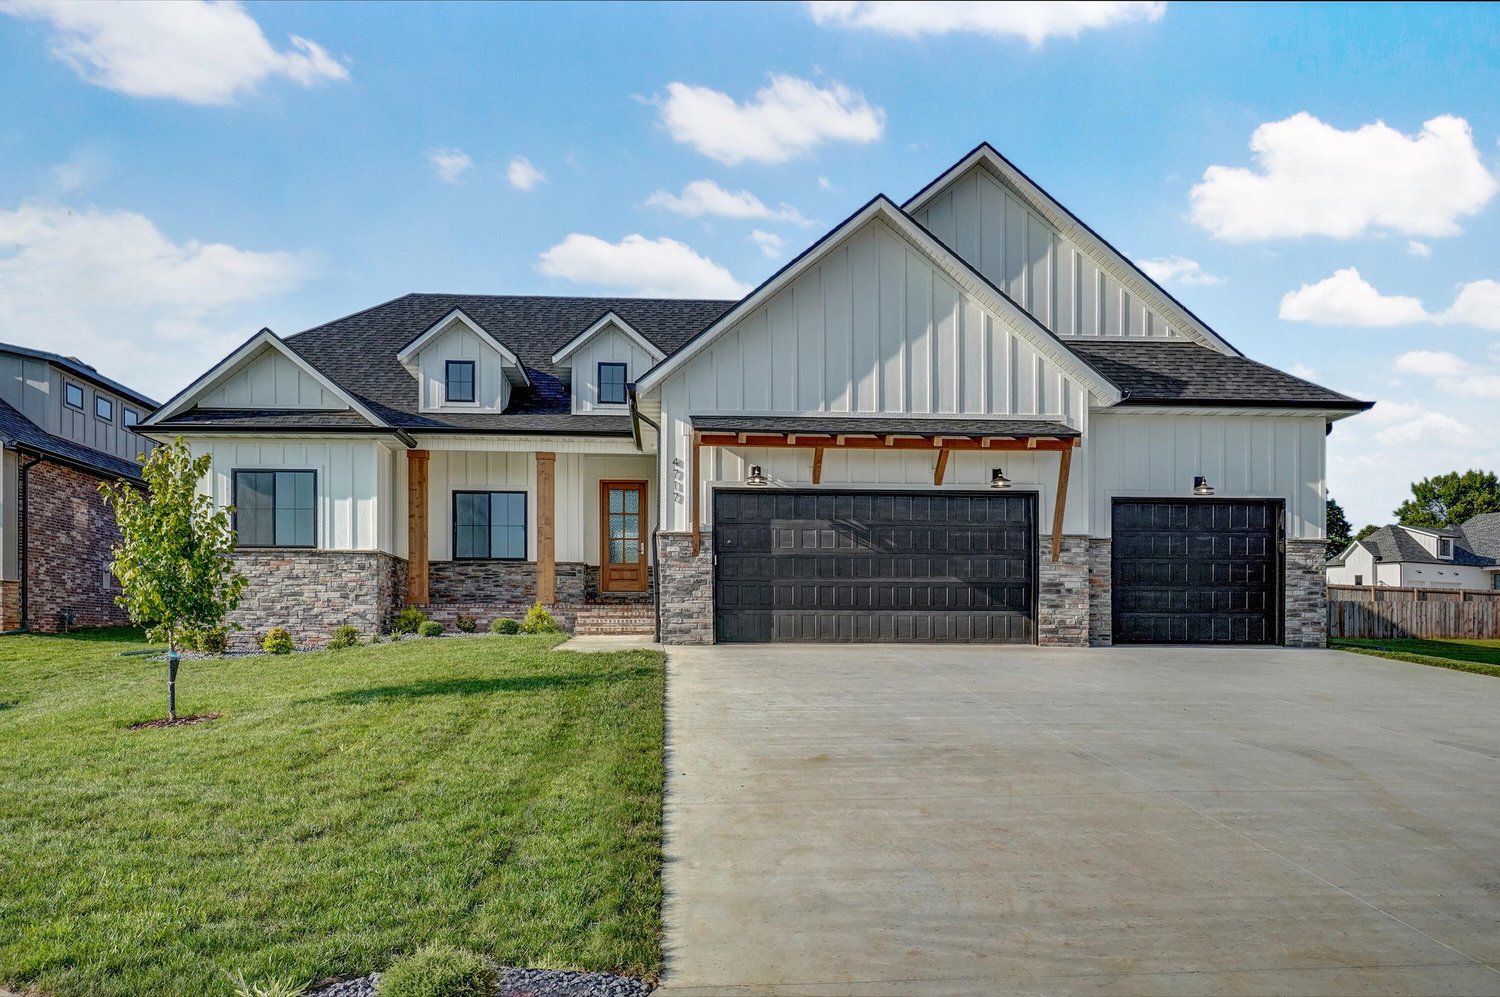 4717 E. Forest Trails Drive
$649,900
Bedrooms: 6
Bathrooms: 5
Listing firm: Keller Williams Greater Springfield